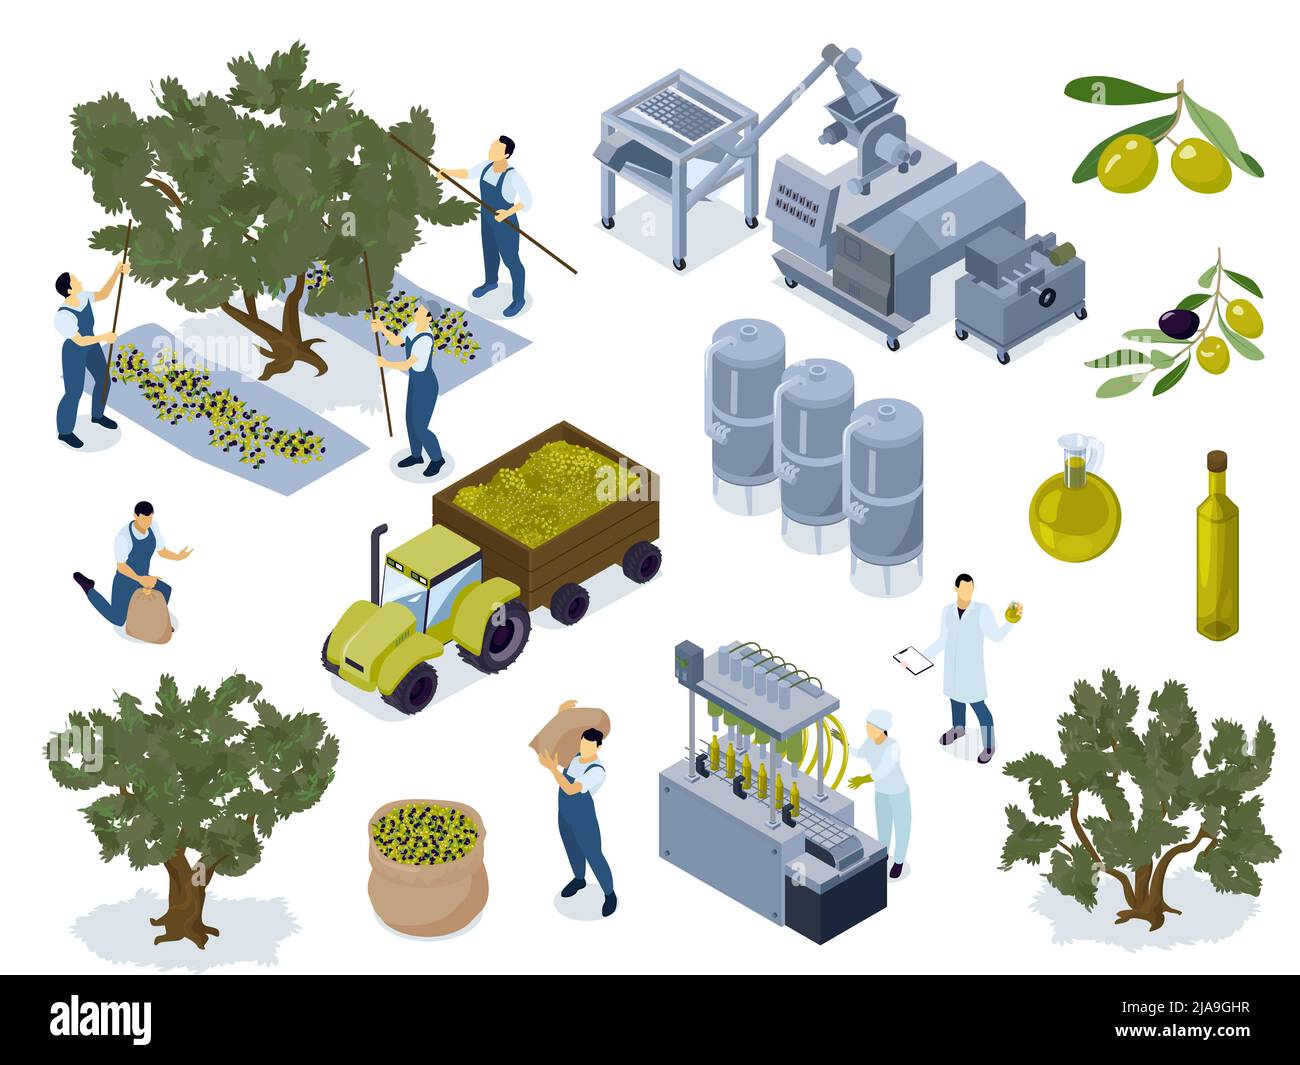 https://c8.alamy.com/comp/2JA9GHR/isometric-olive-oil-production-set-of-isolated-tree-icons-with-olives-factory-tanks-and-human-workers-vector-illustration-2JA9GHR.jpg